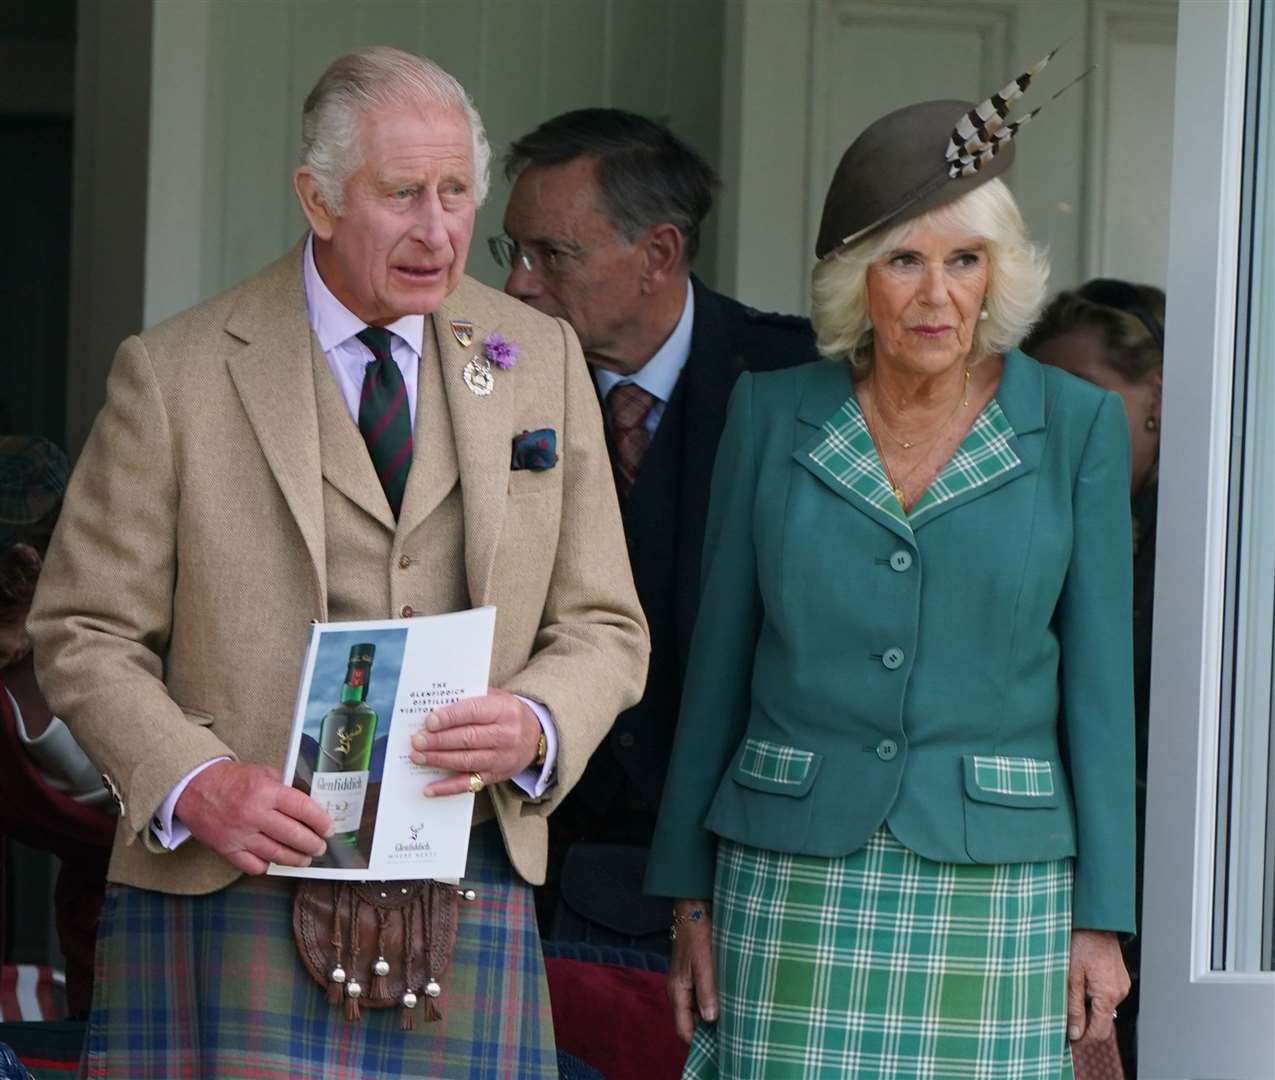 The King and Queen at the Balmoral estate in Aberdeenshire (Andrew Milligan/PA)